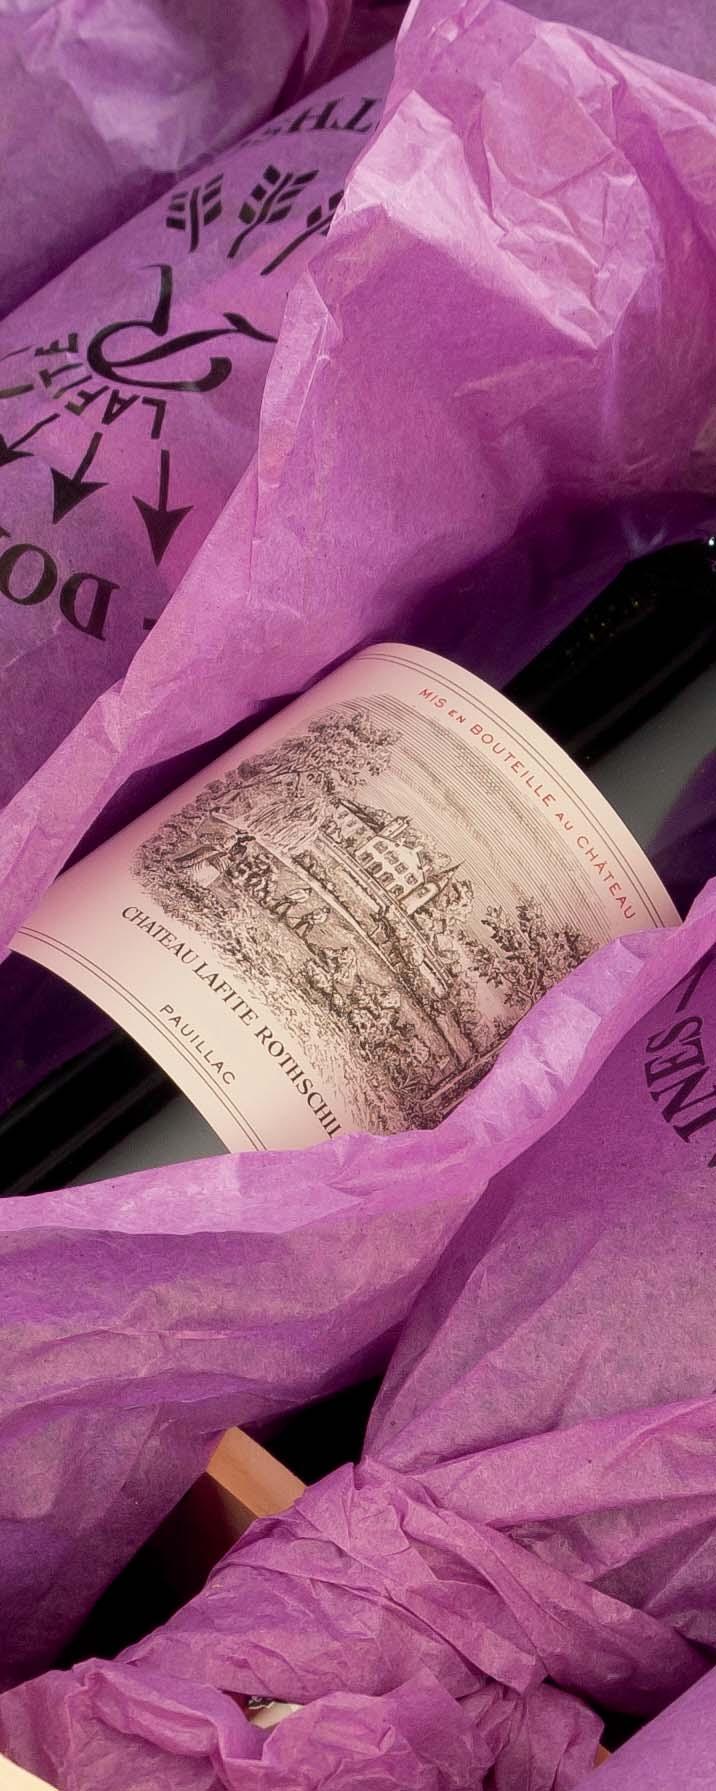 2015 BORDEAUX FUTURES The 2015 Bordeaux futures campaign has been the most successful ever for HDH.